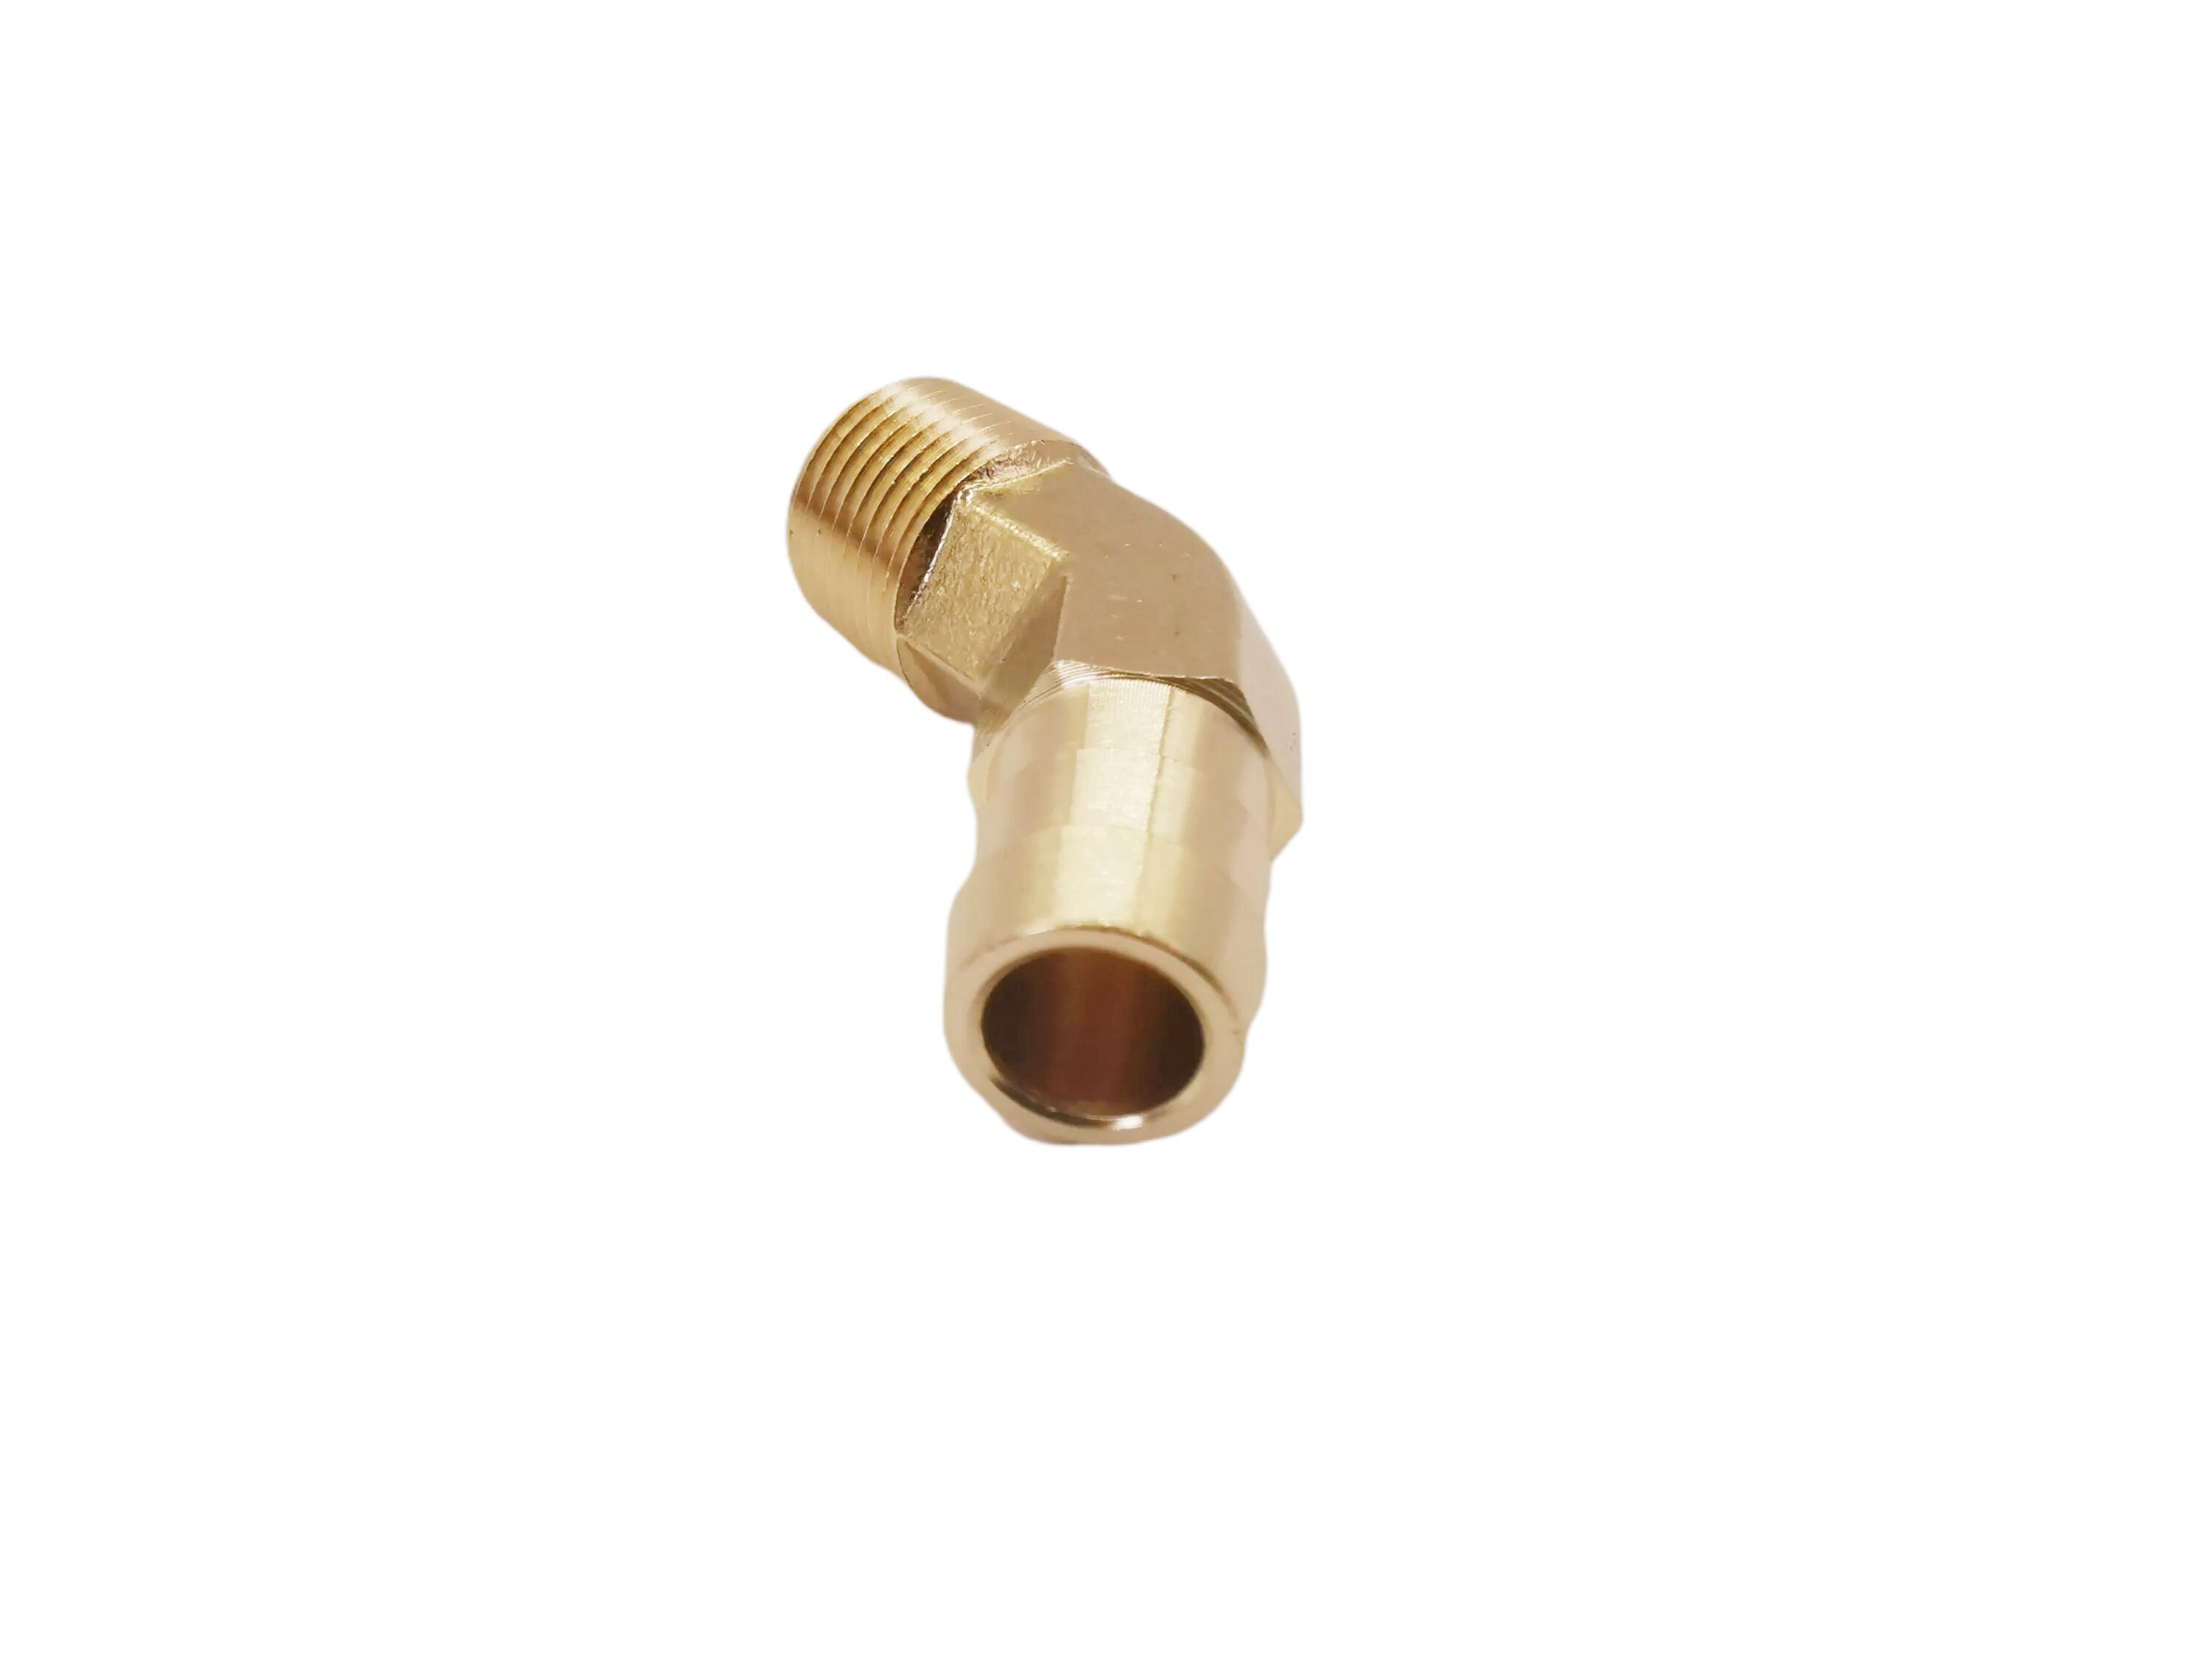  BARB X MALE PIPE ELBOW( OD*MIP) 45°202-45系列